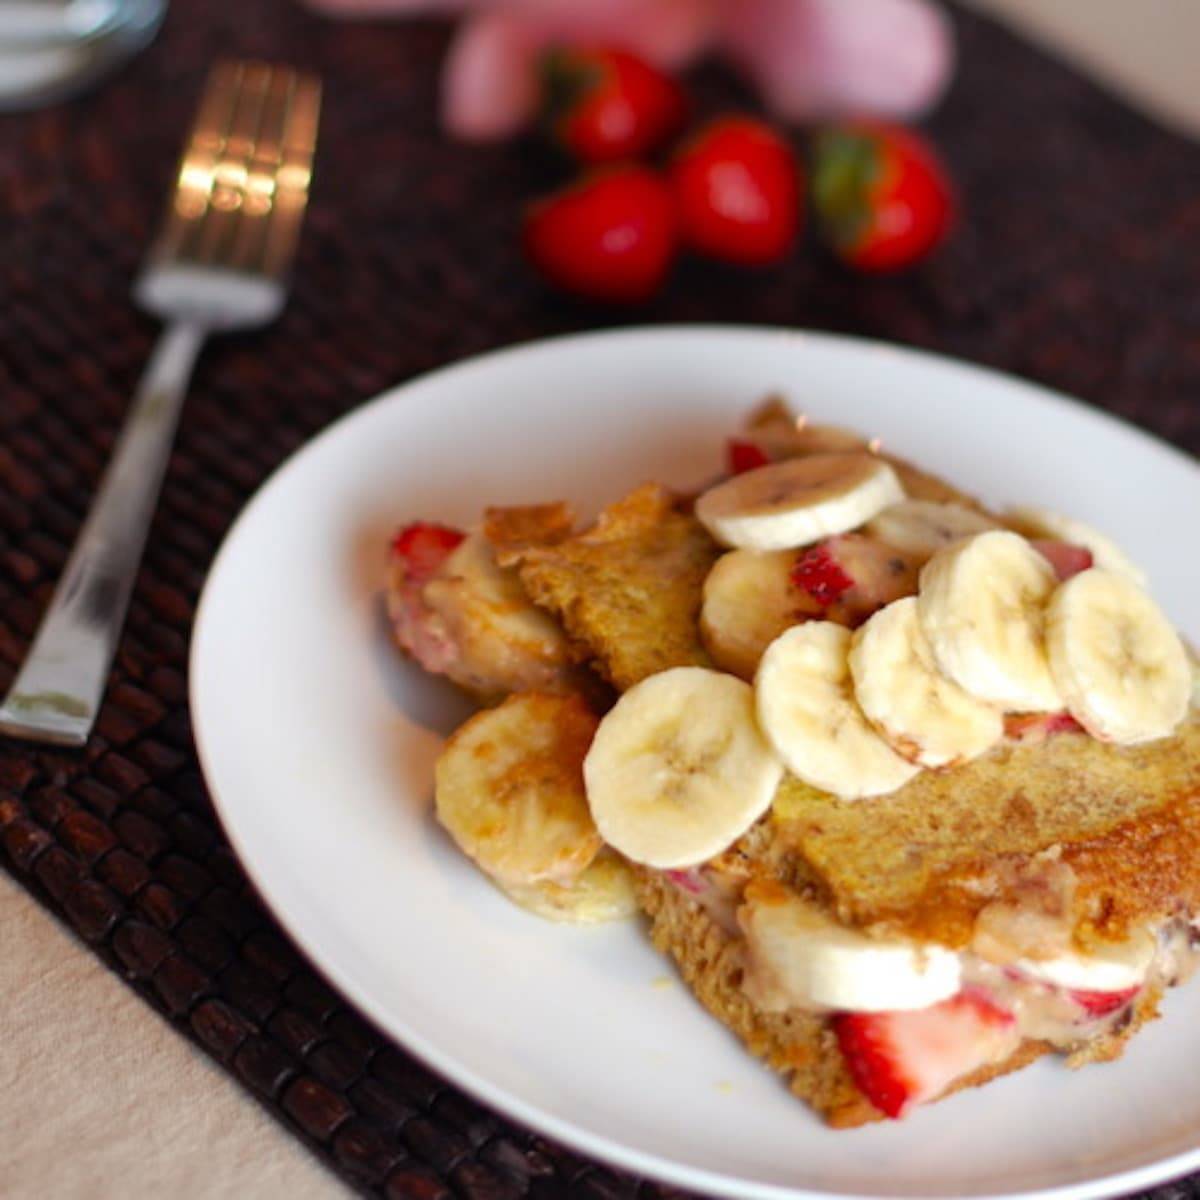 Stuffed French Toast with strawberries, bananas, and maple syrup on a plate with a fork.